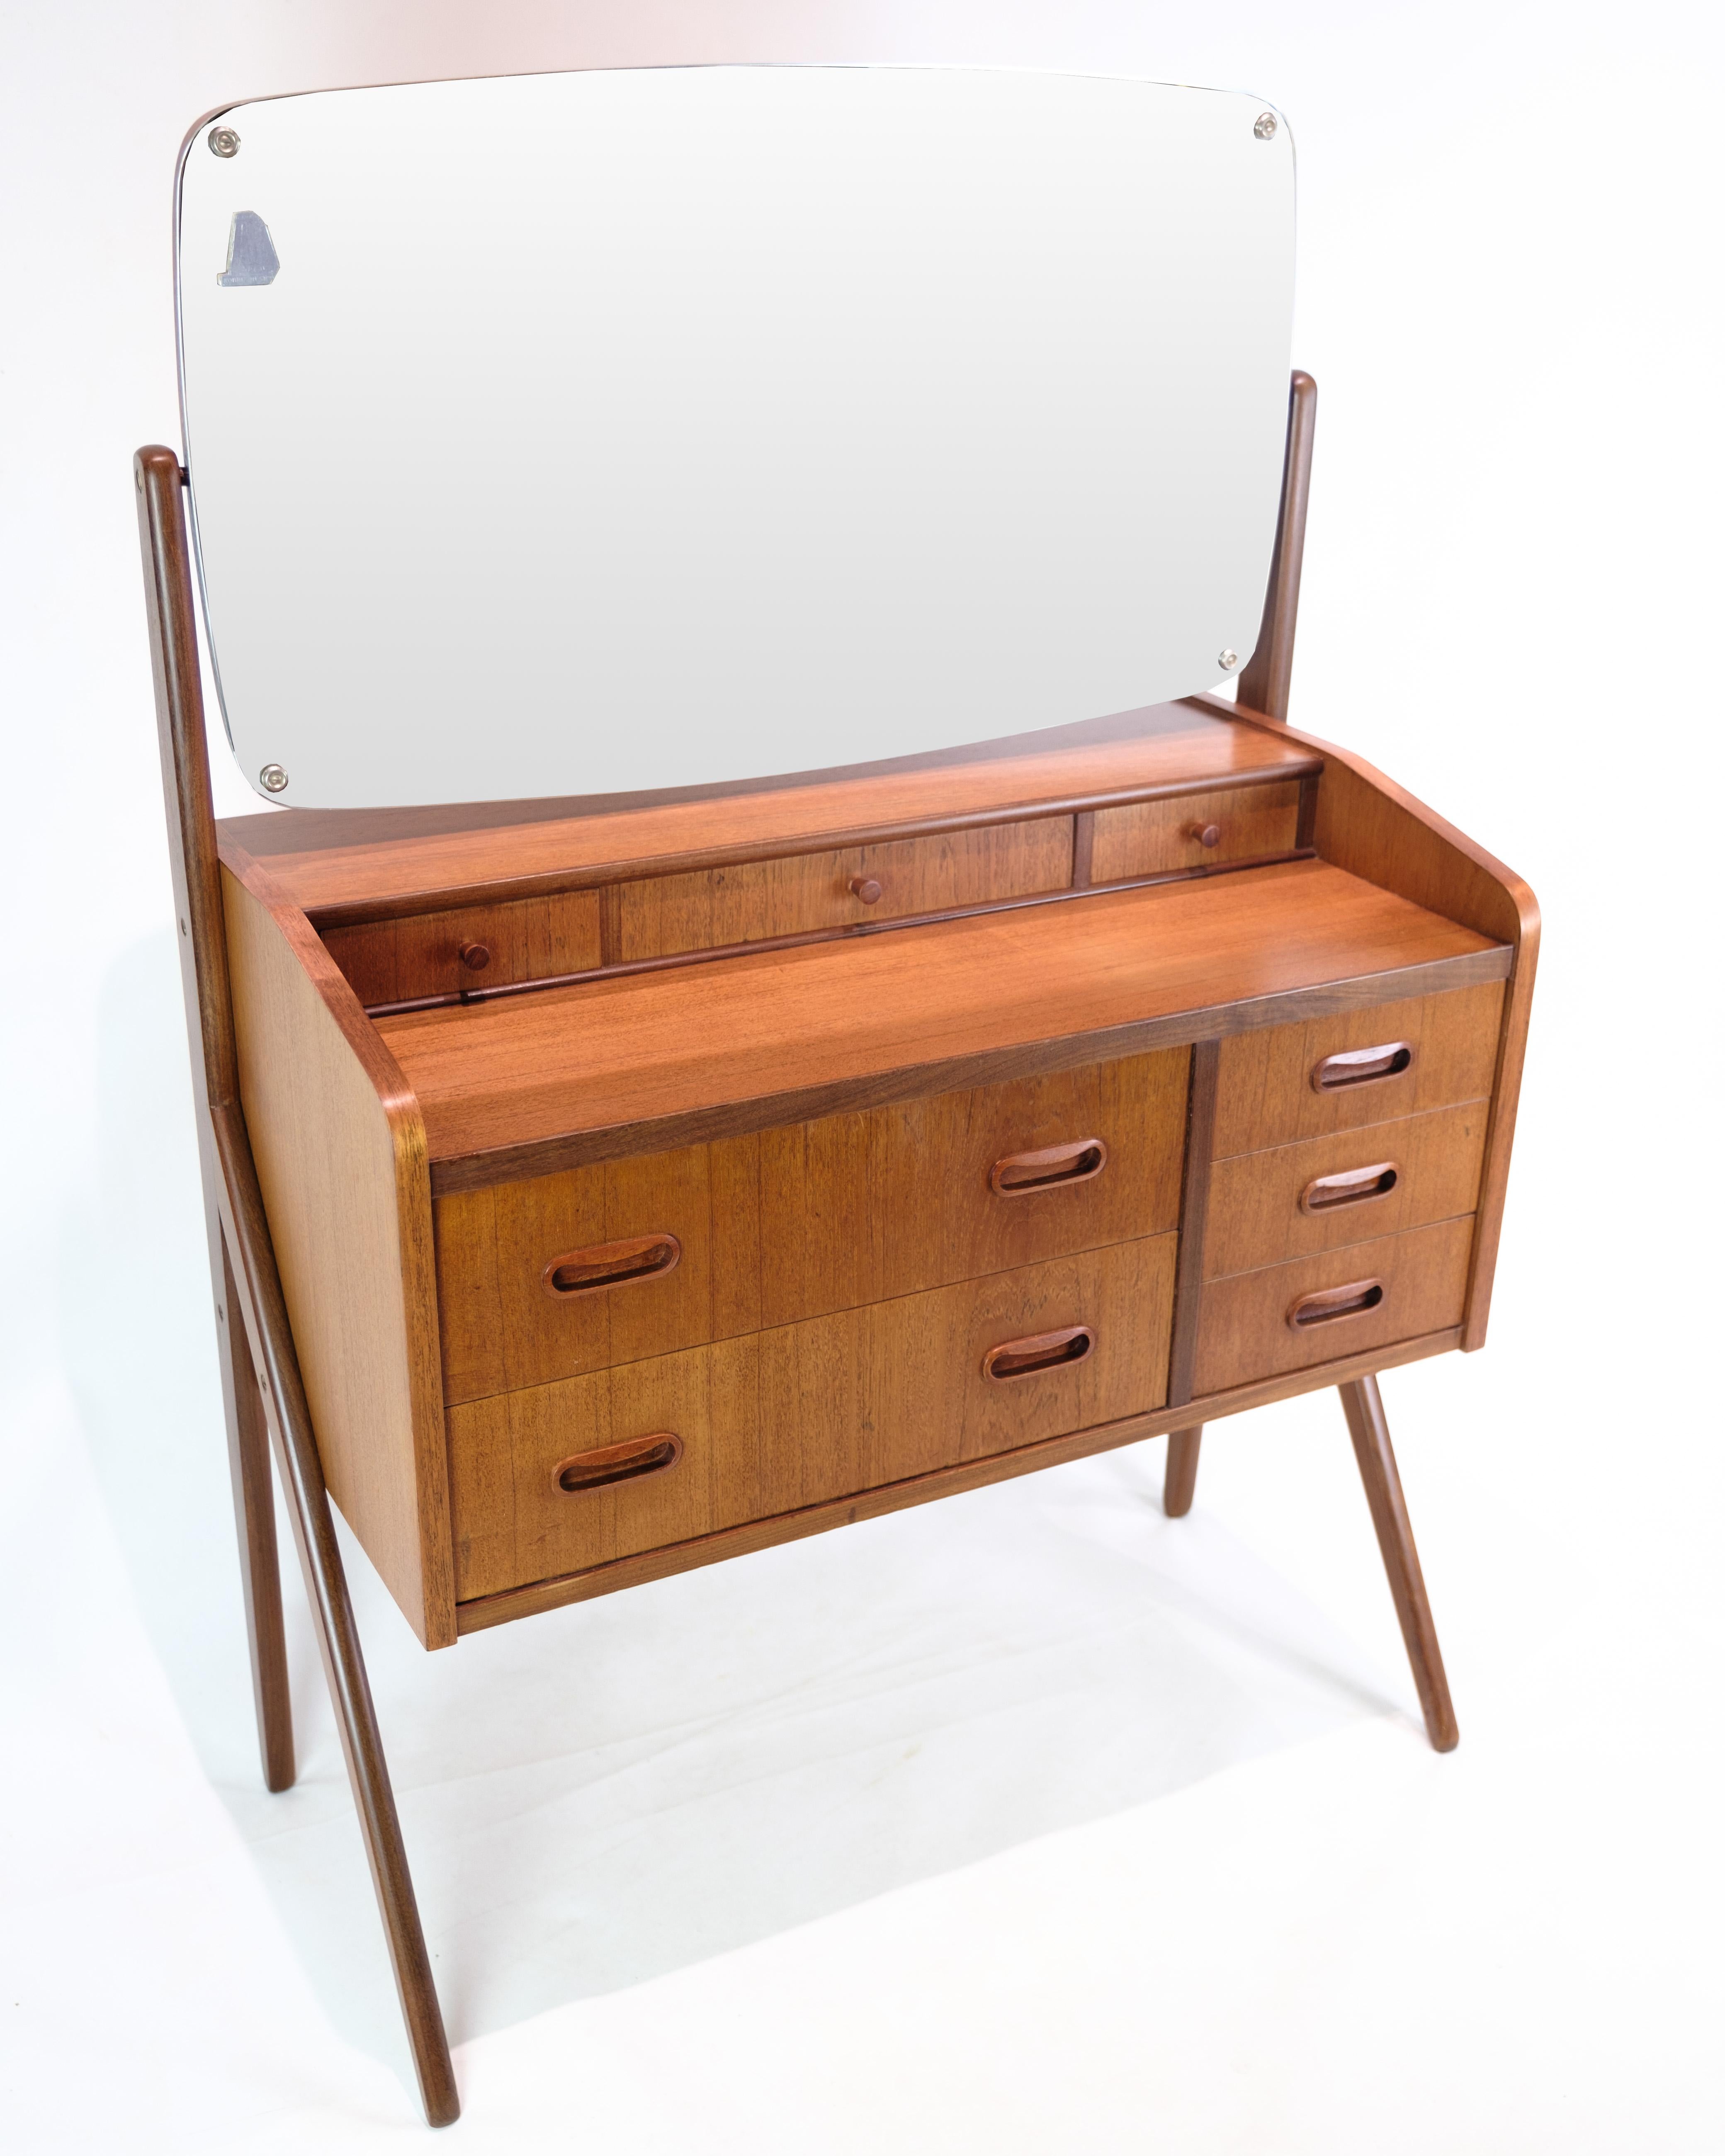 This dresser with adjustable mirror is a beautiful example of Danish design from the 1960s. Made of teak wood, it exudes the warmth and natural beauty that characterizes this popular wood material. With two large drawers and three smaller drawers,